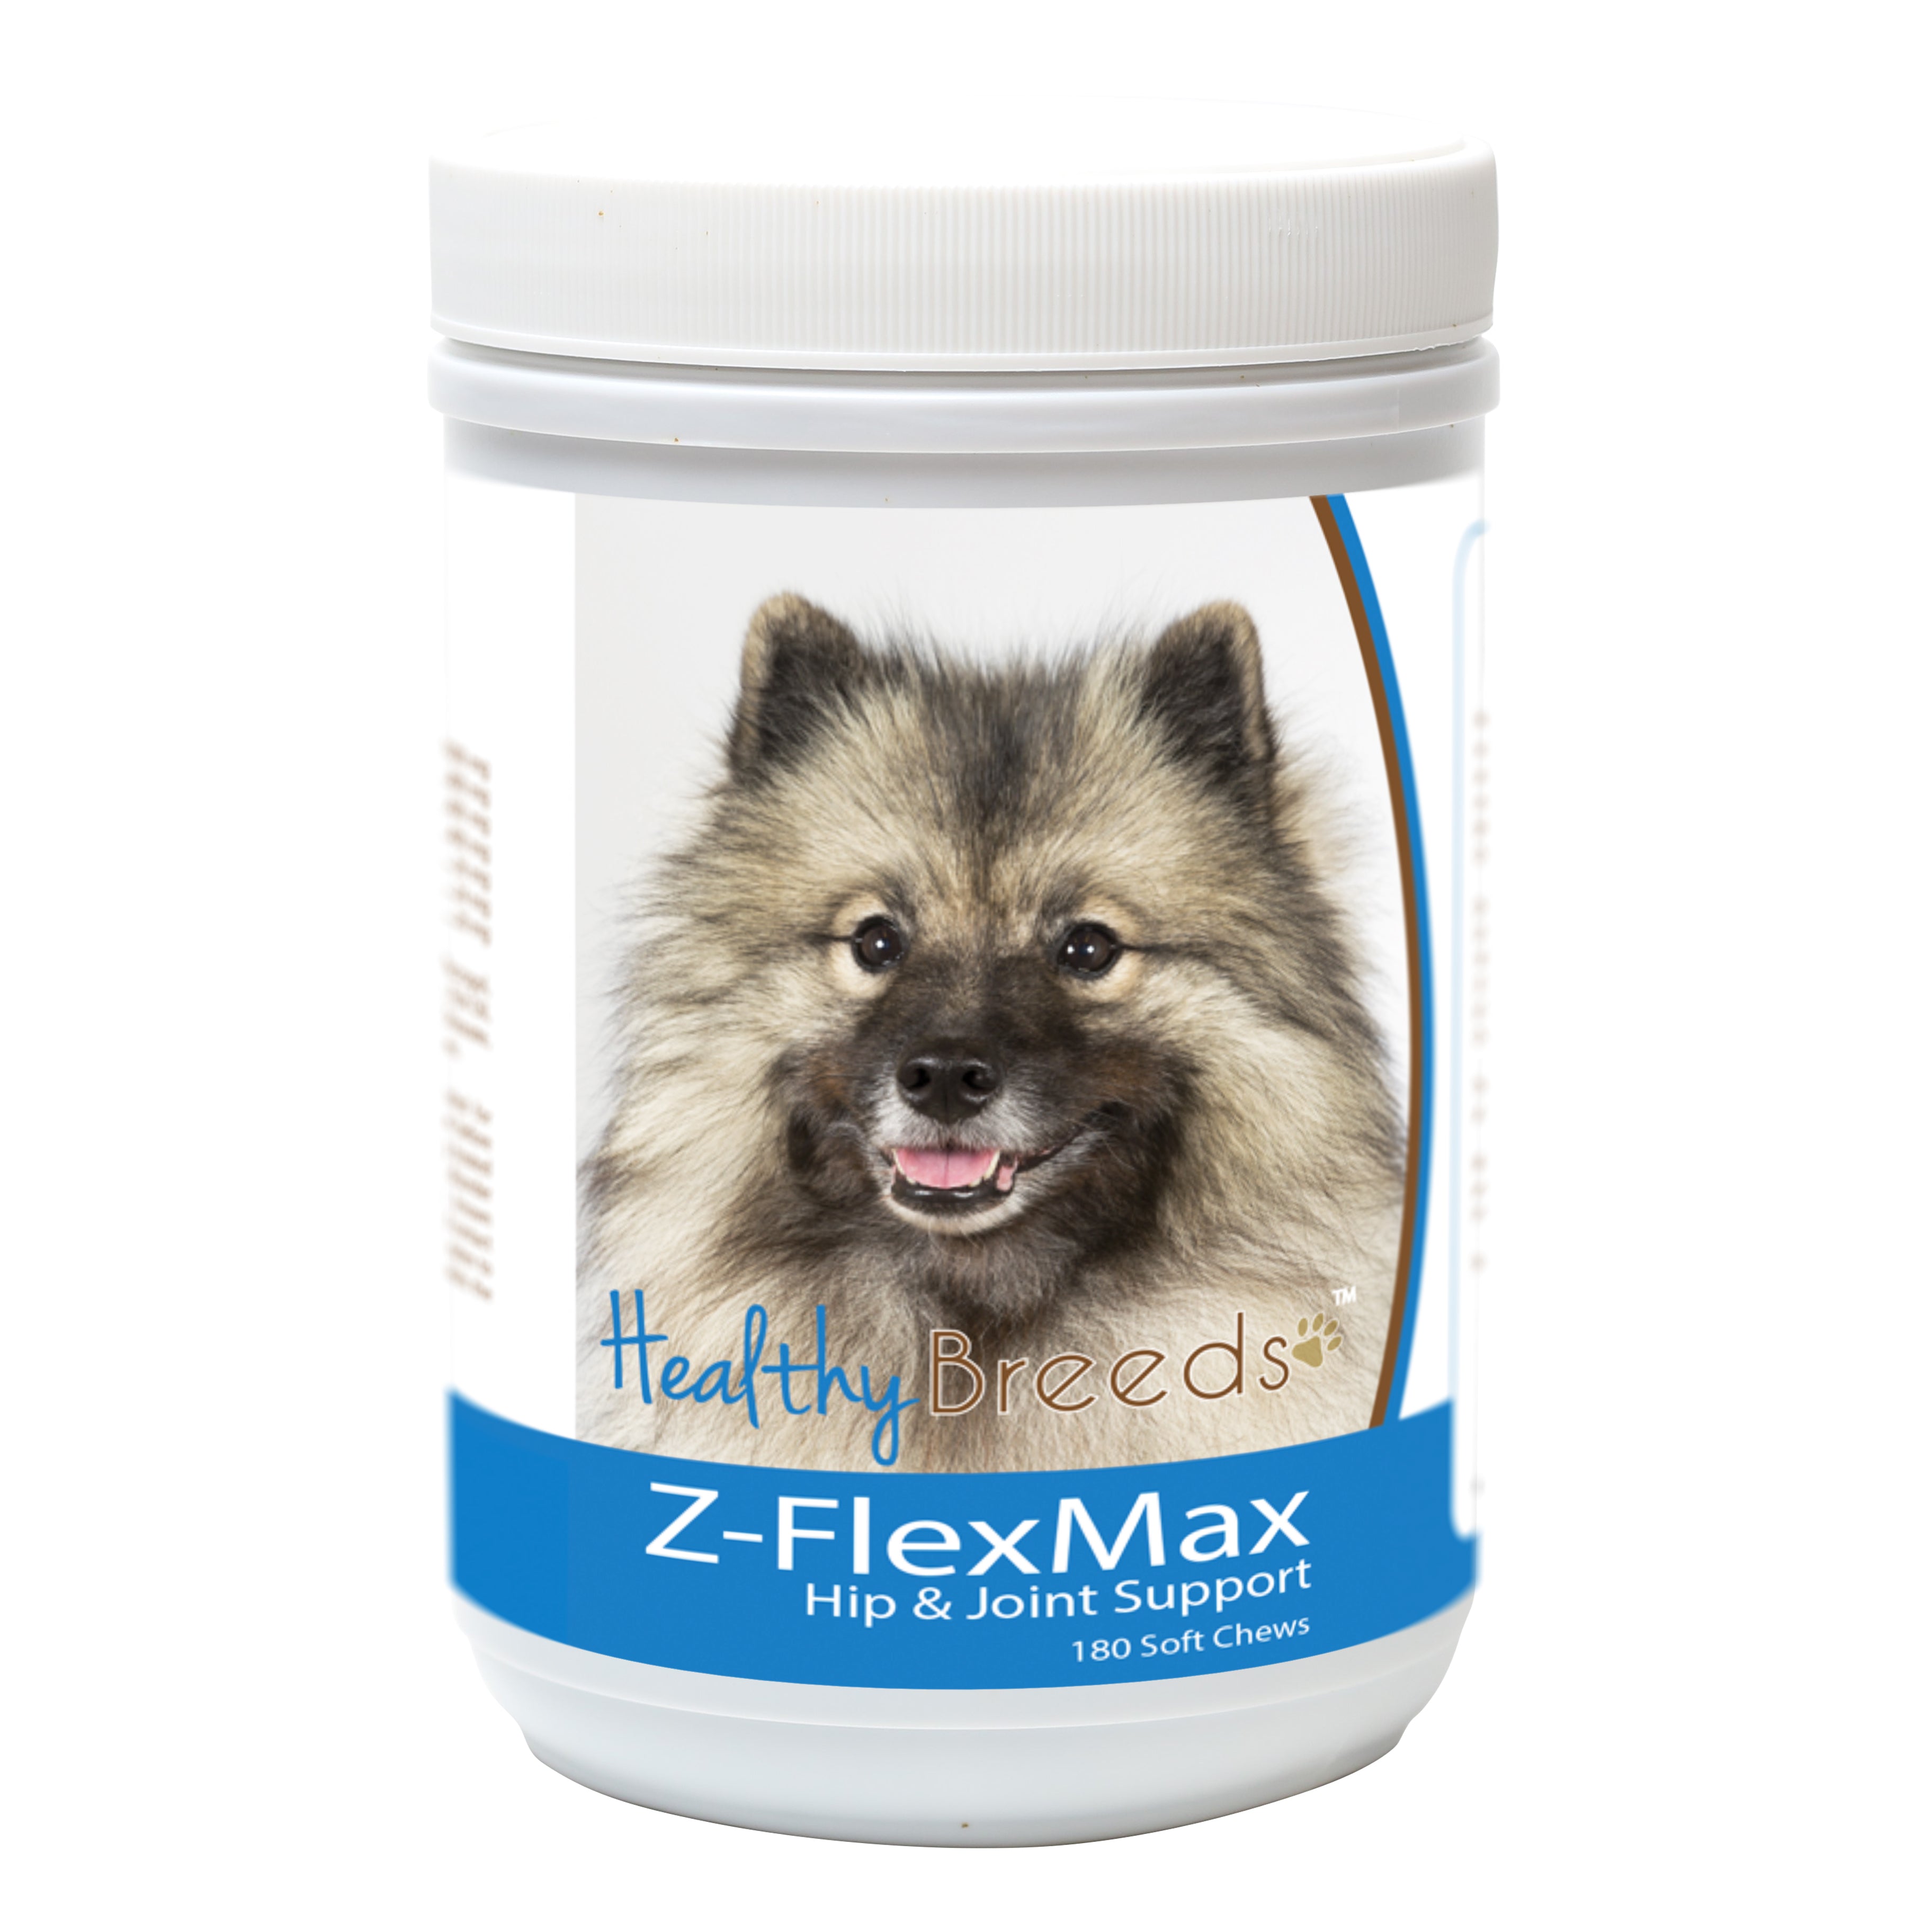 Keeshonden Z-Flex Max Dog Hip and Joint Support 180 Count